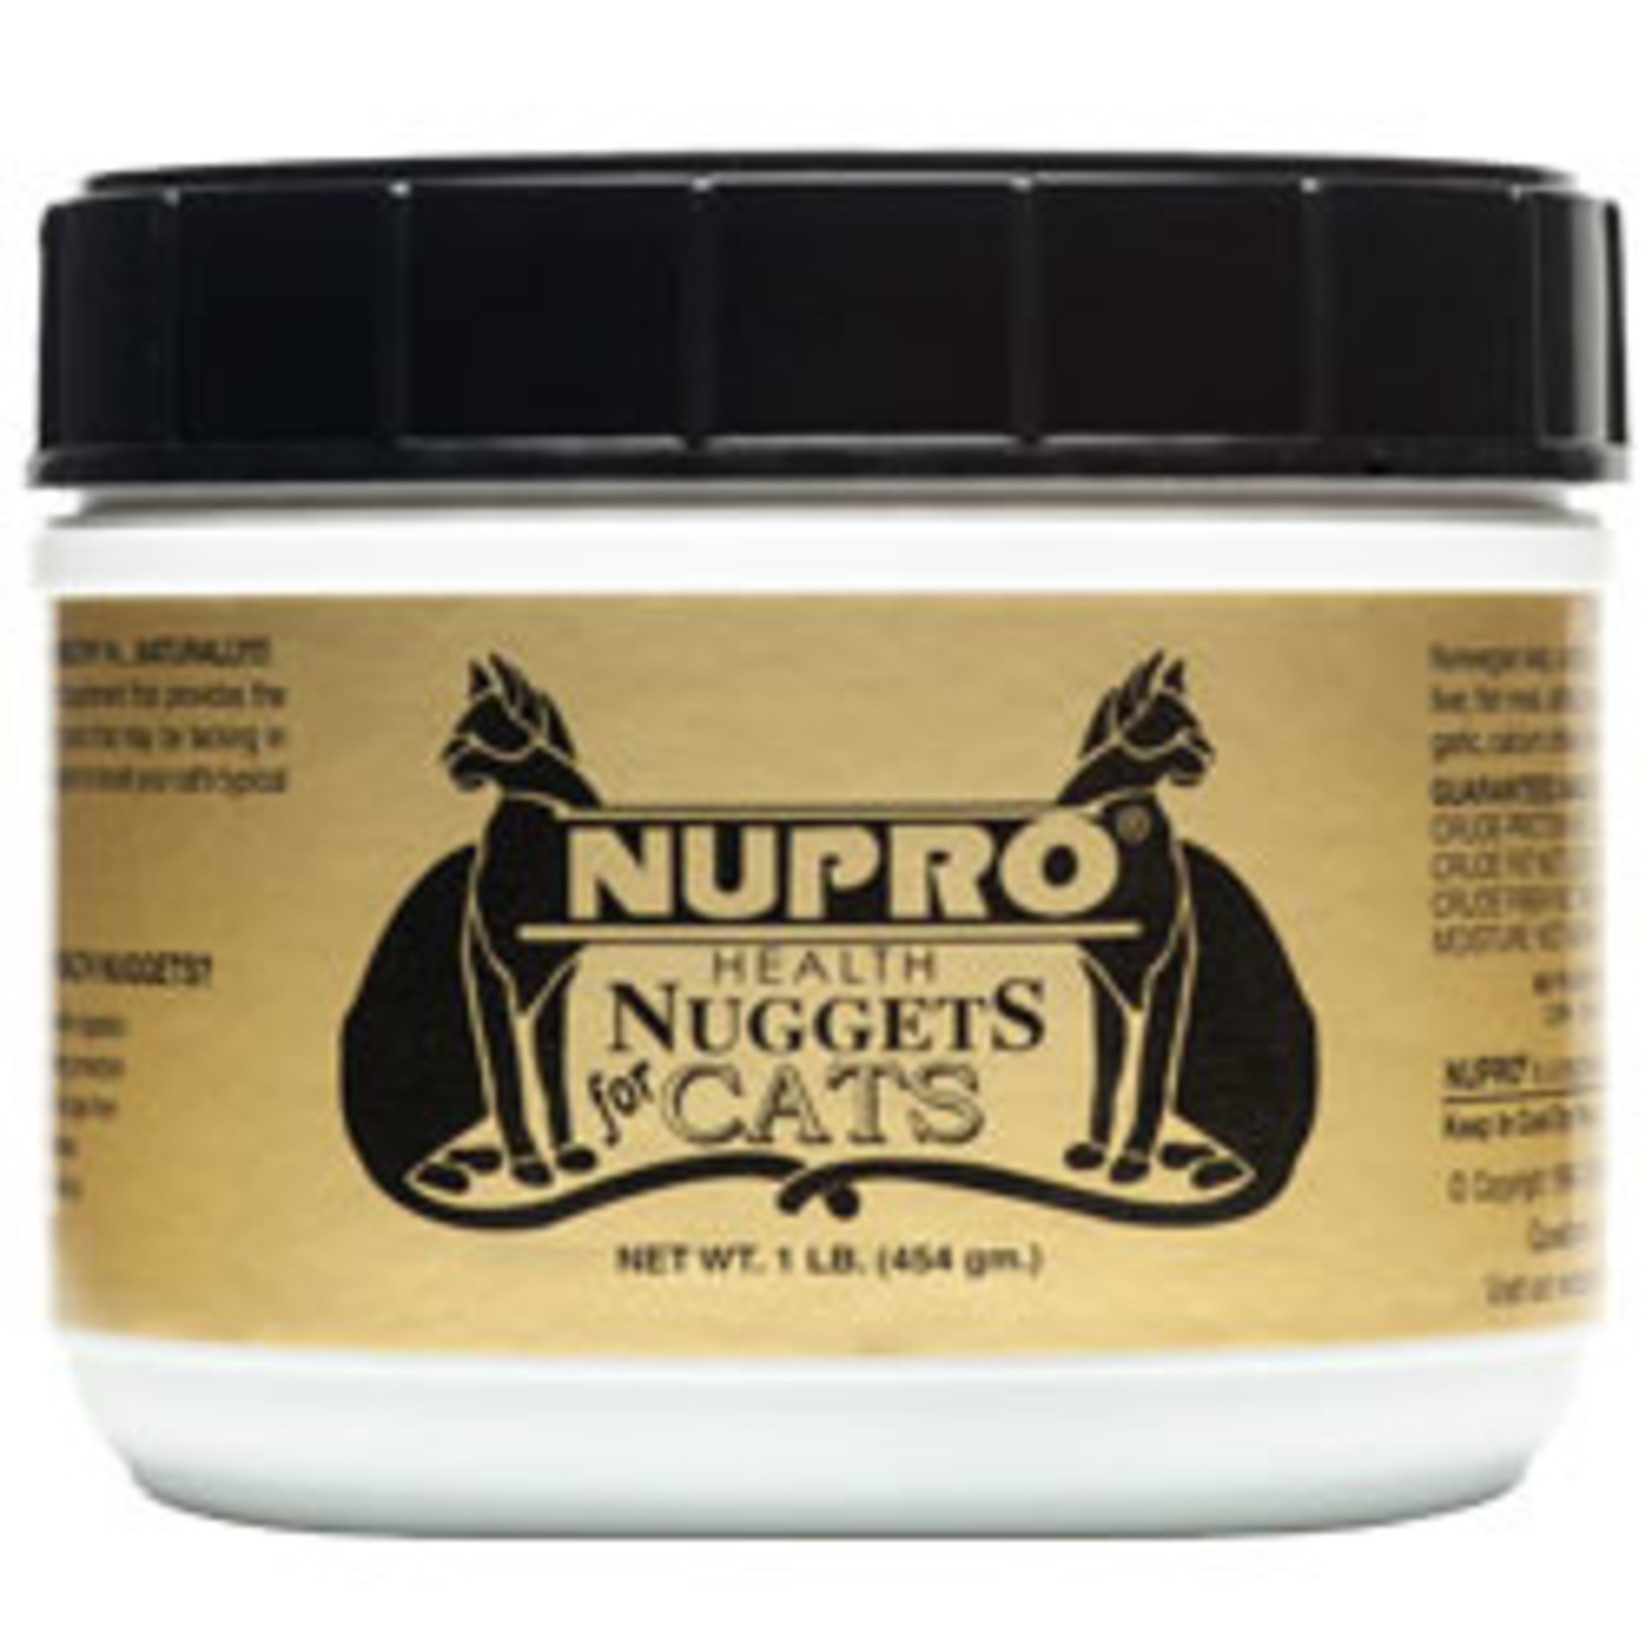 Nupro Nupro Health Nuggets for Cats 1lb